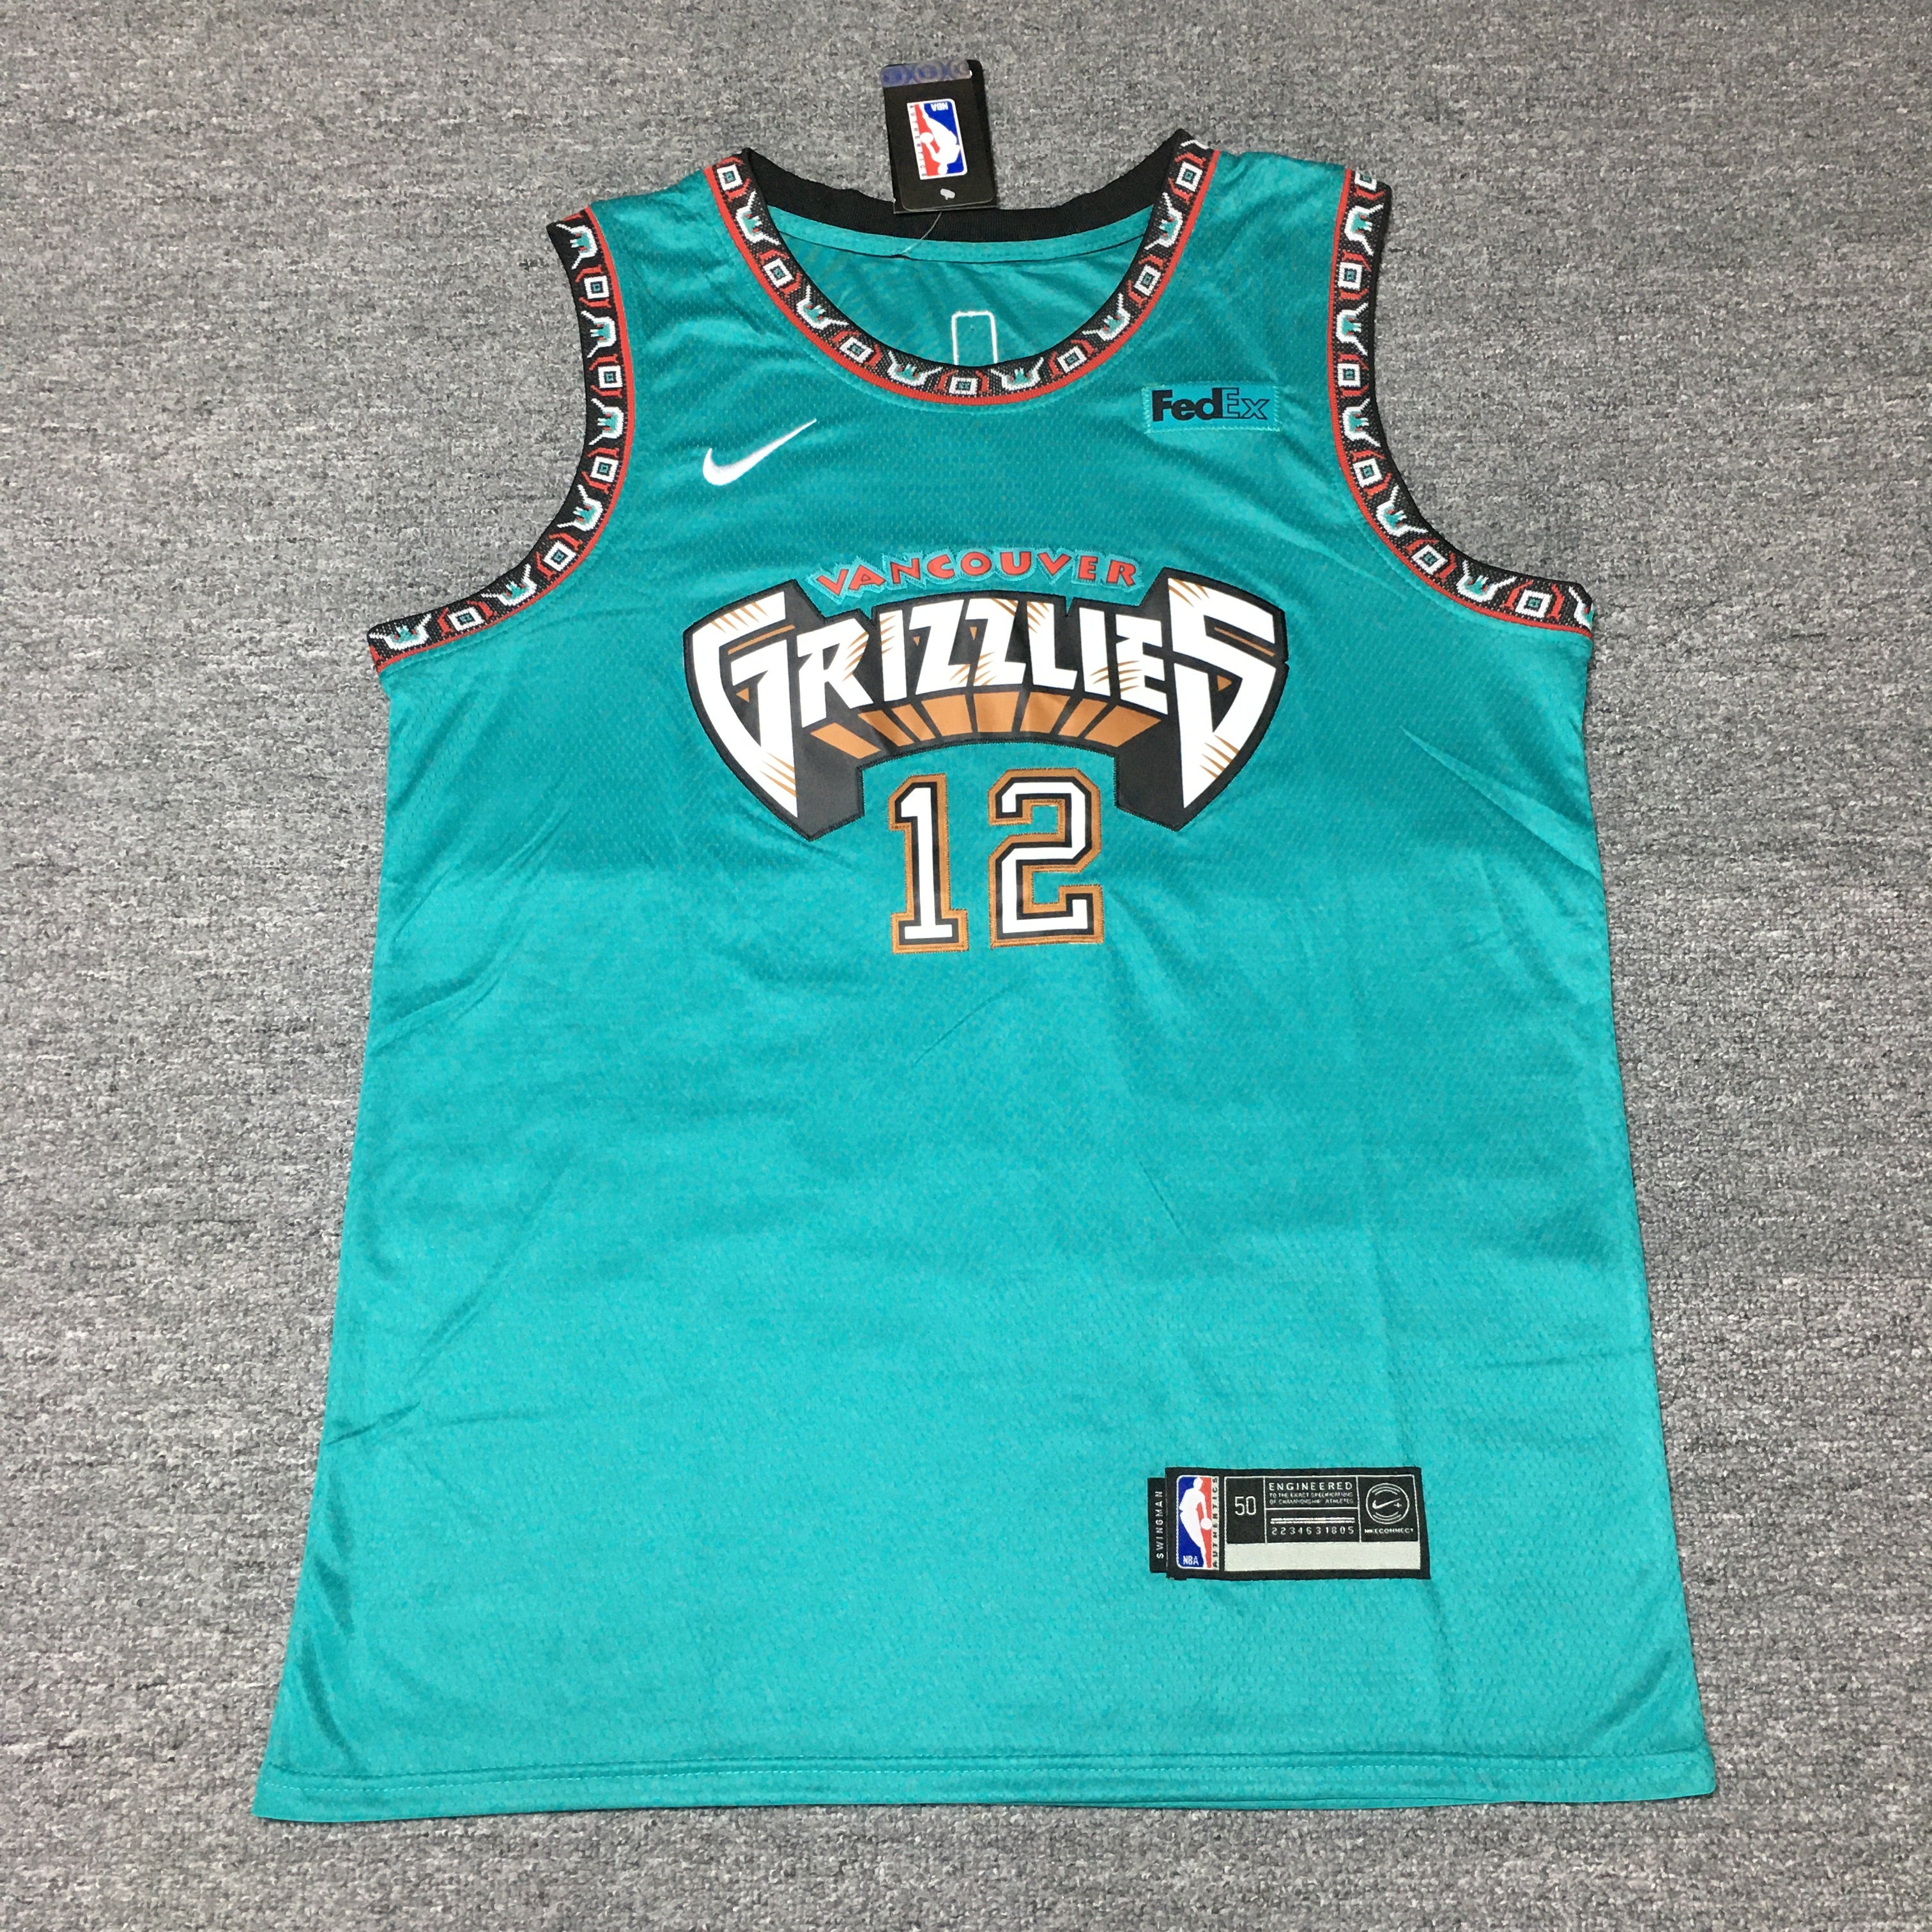 Vancouver grizzlies classic edition authentic NBA jersey Morant